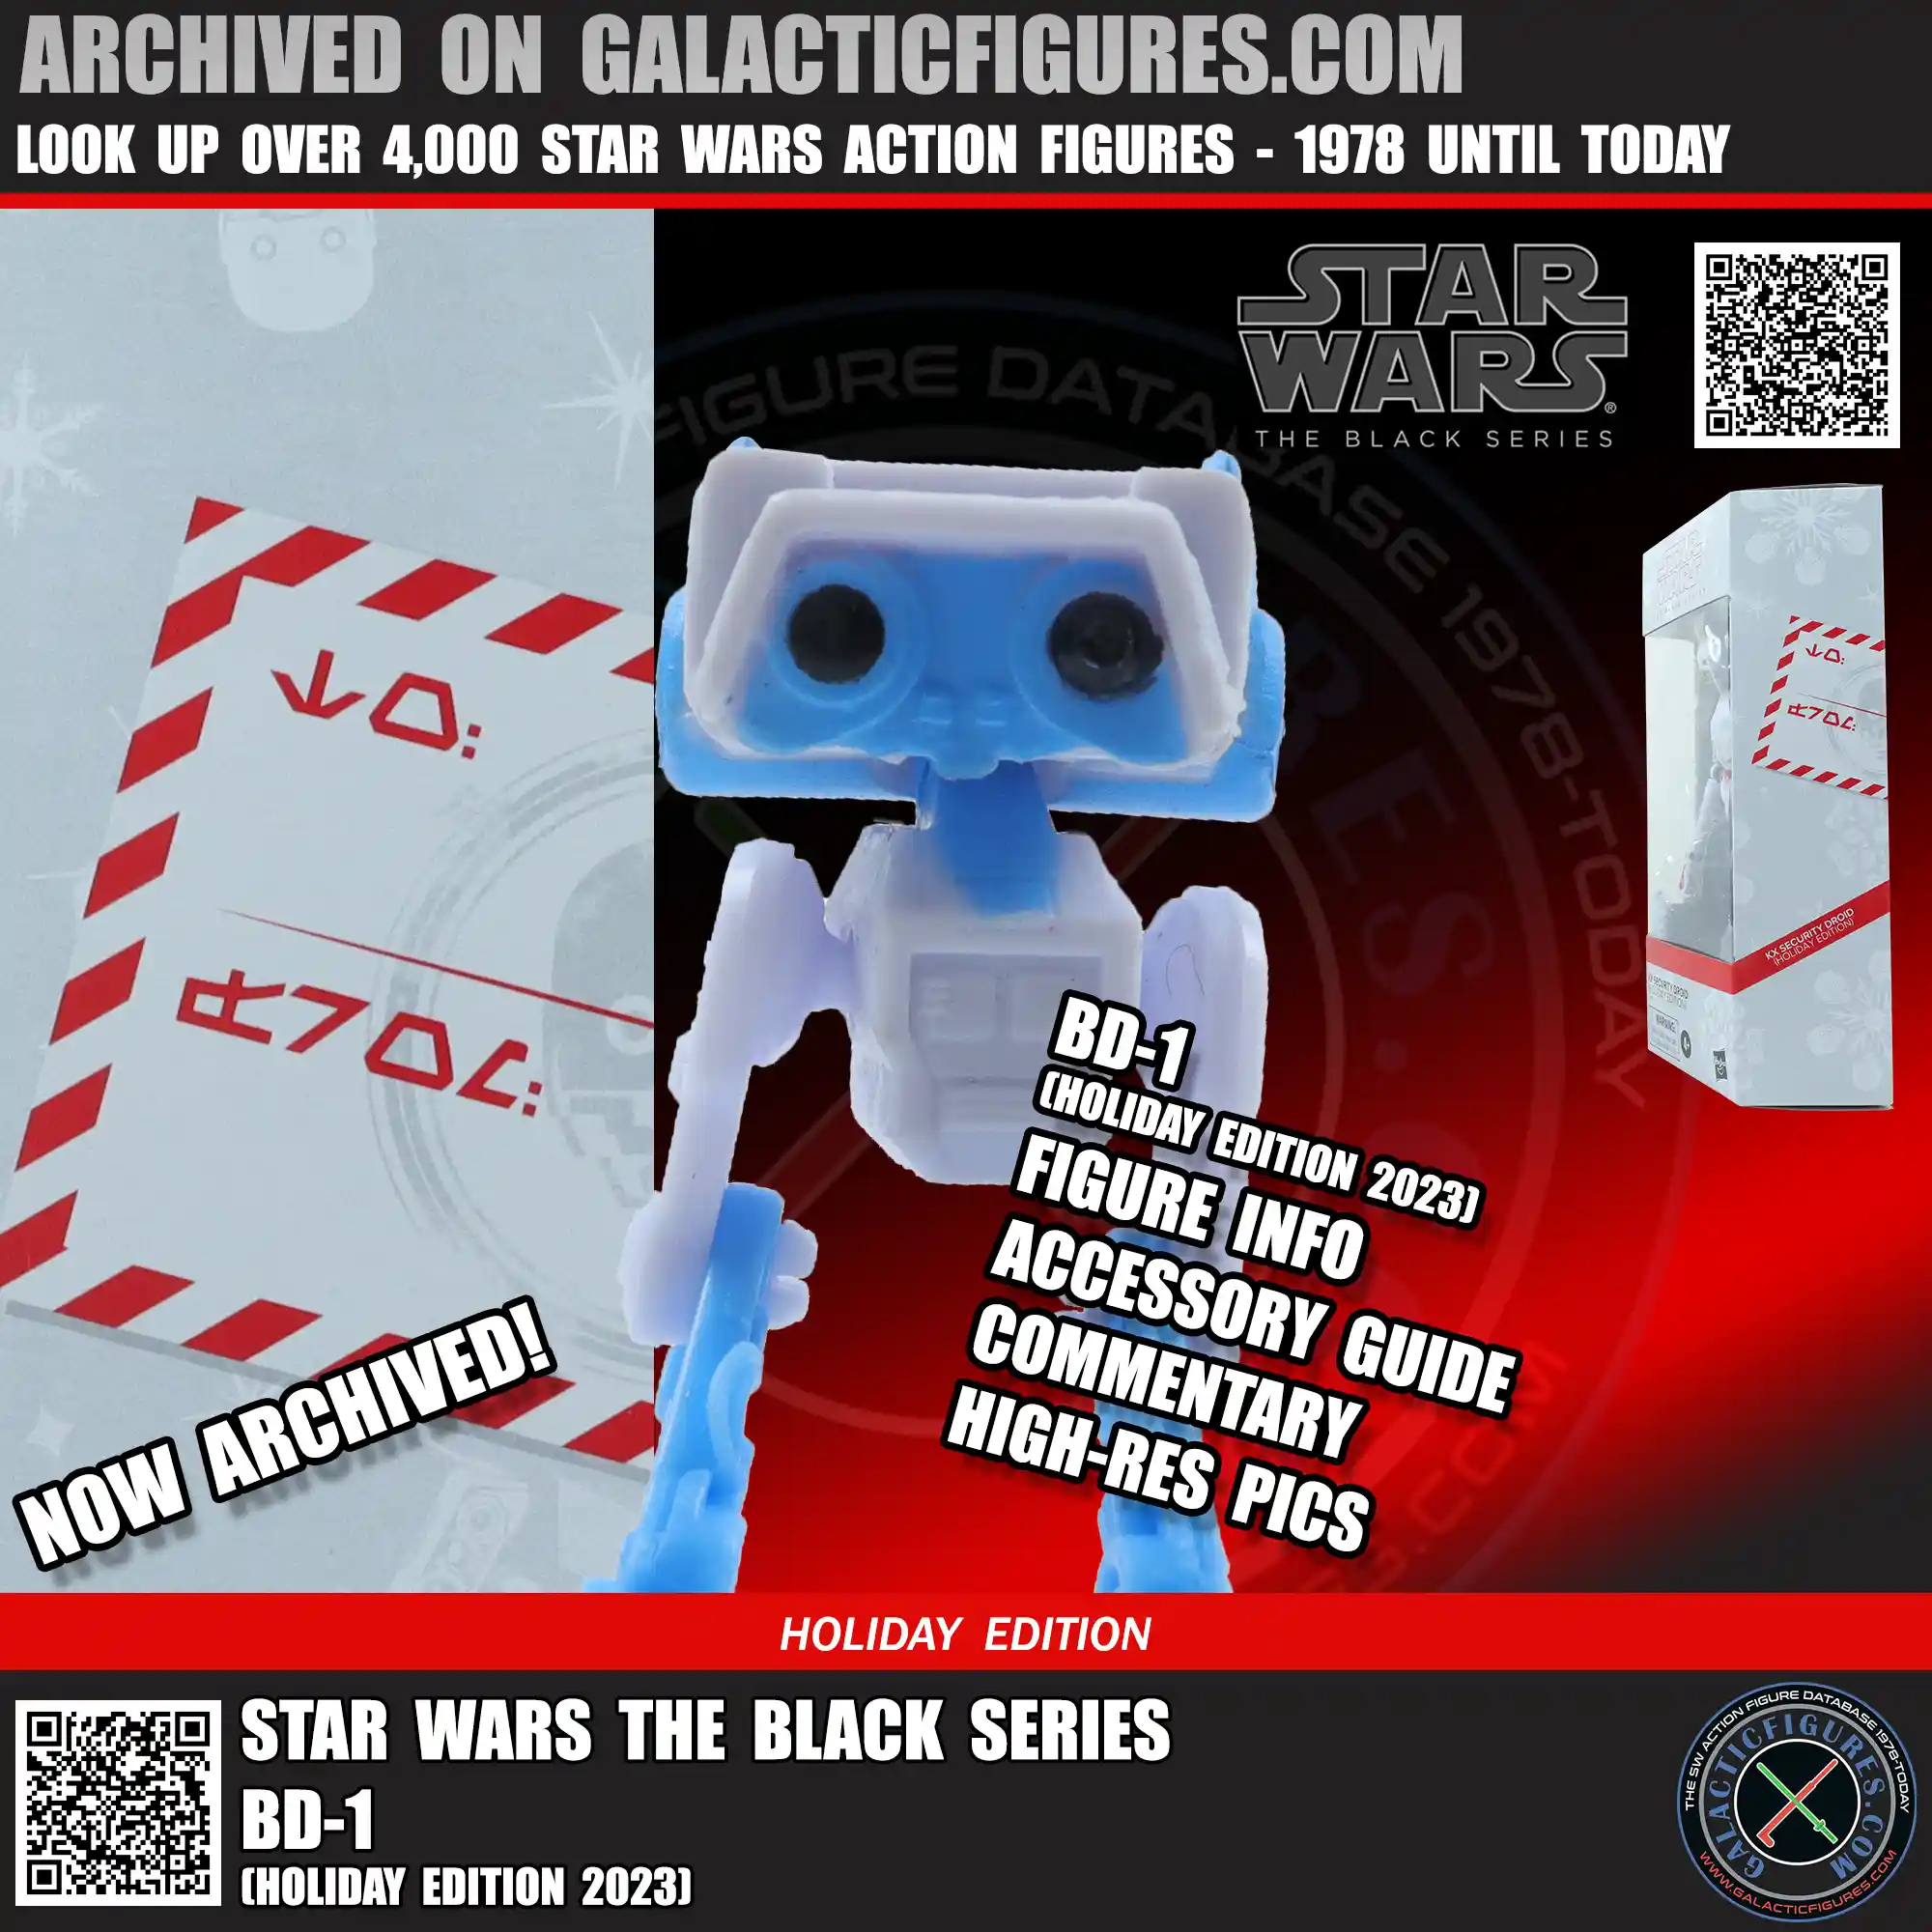 Black Series BD-1 Holiday Edition 2023 Added